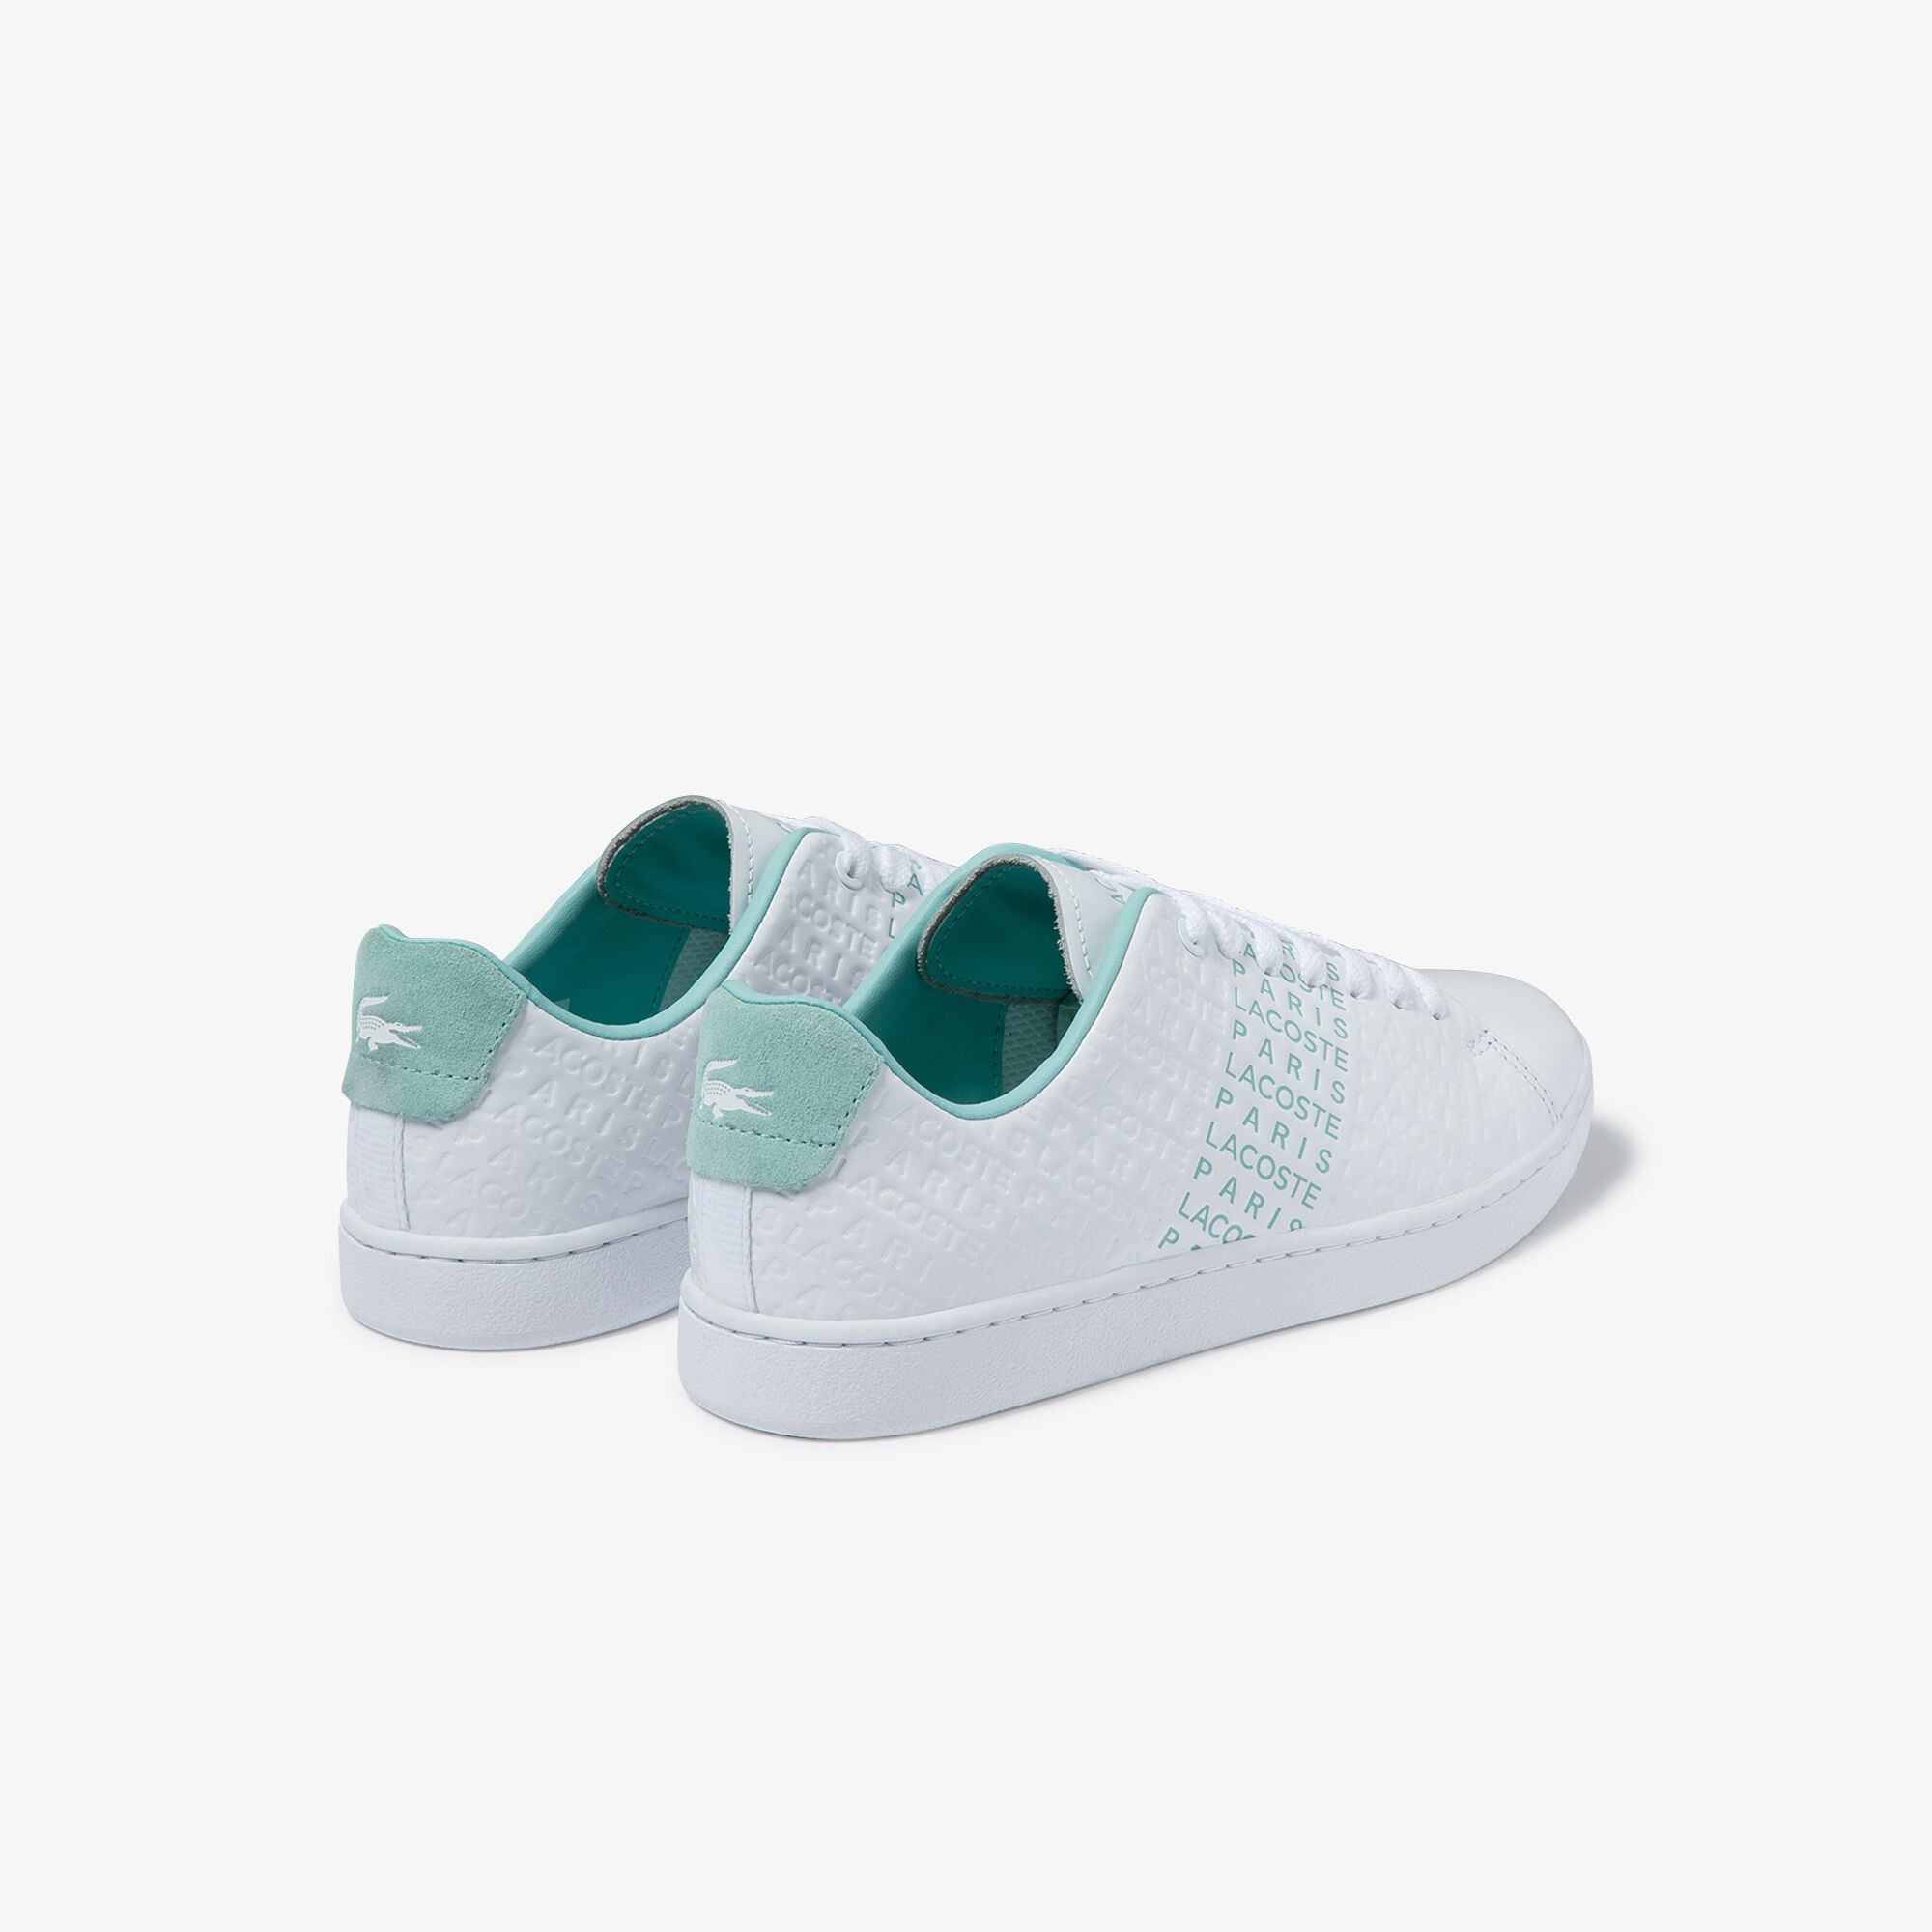 Women's Carnaby Evo Leather and Suede Sneakers